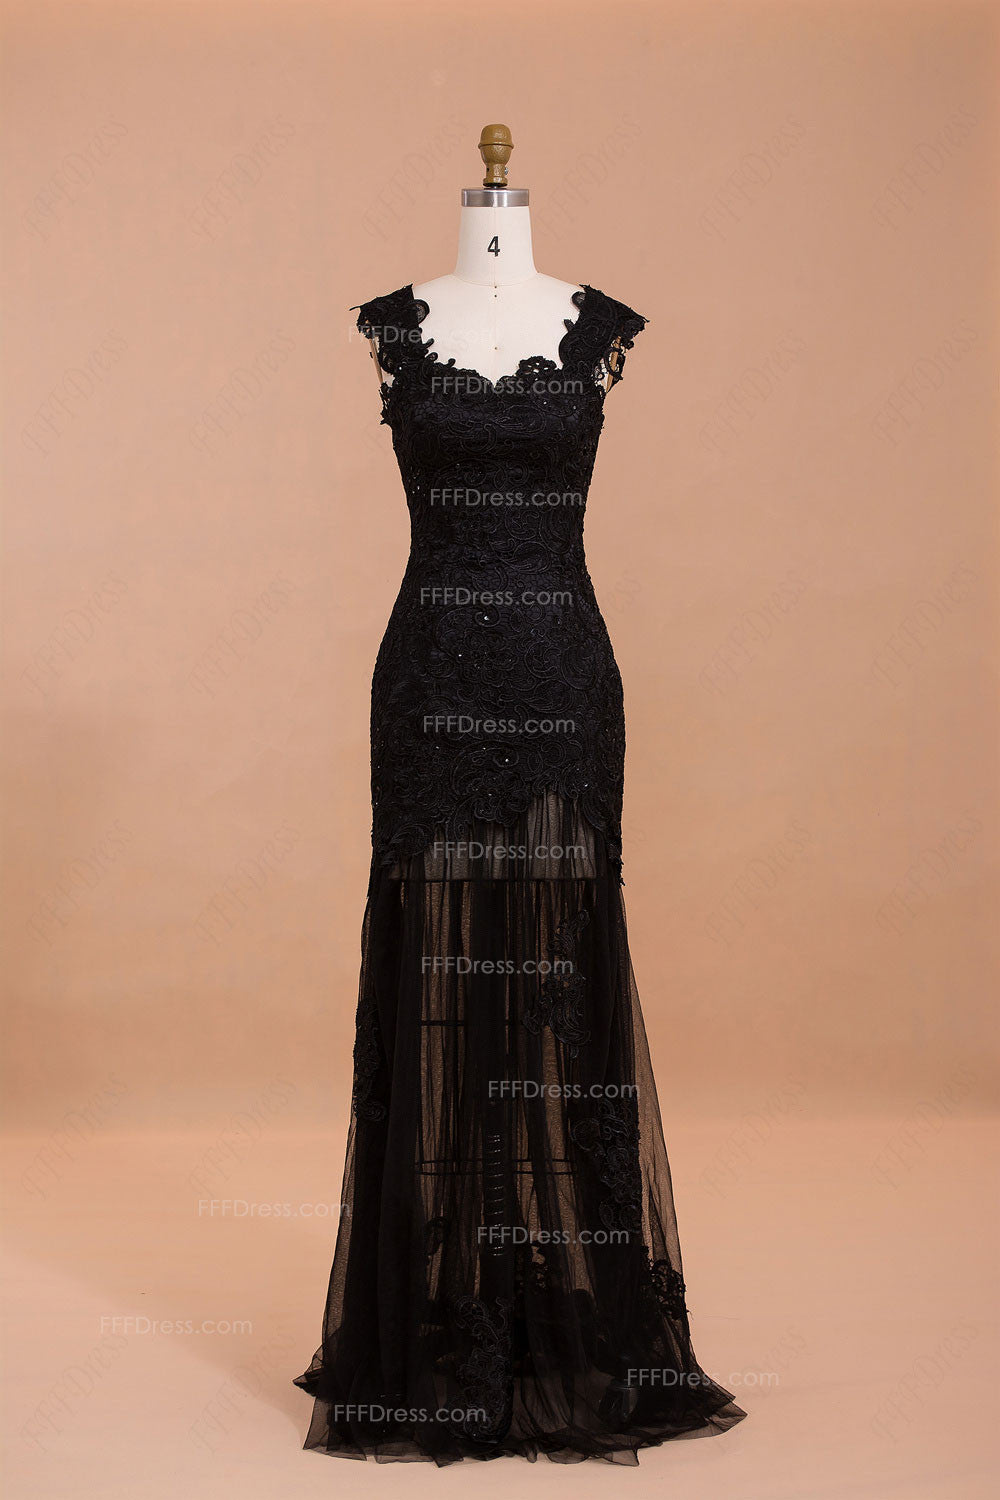 Trumpet beaded black lace prom dress with see through skirt